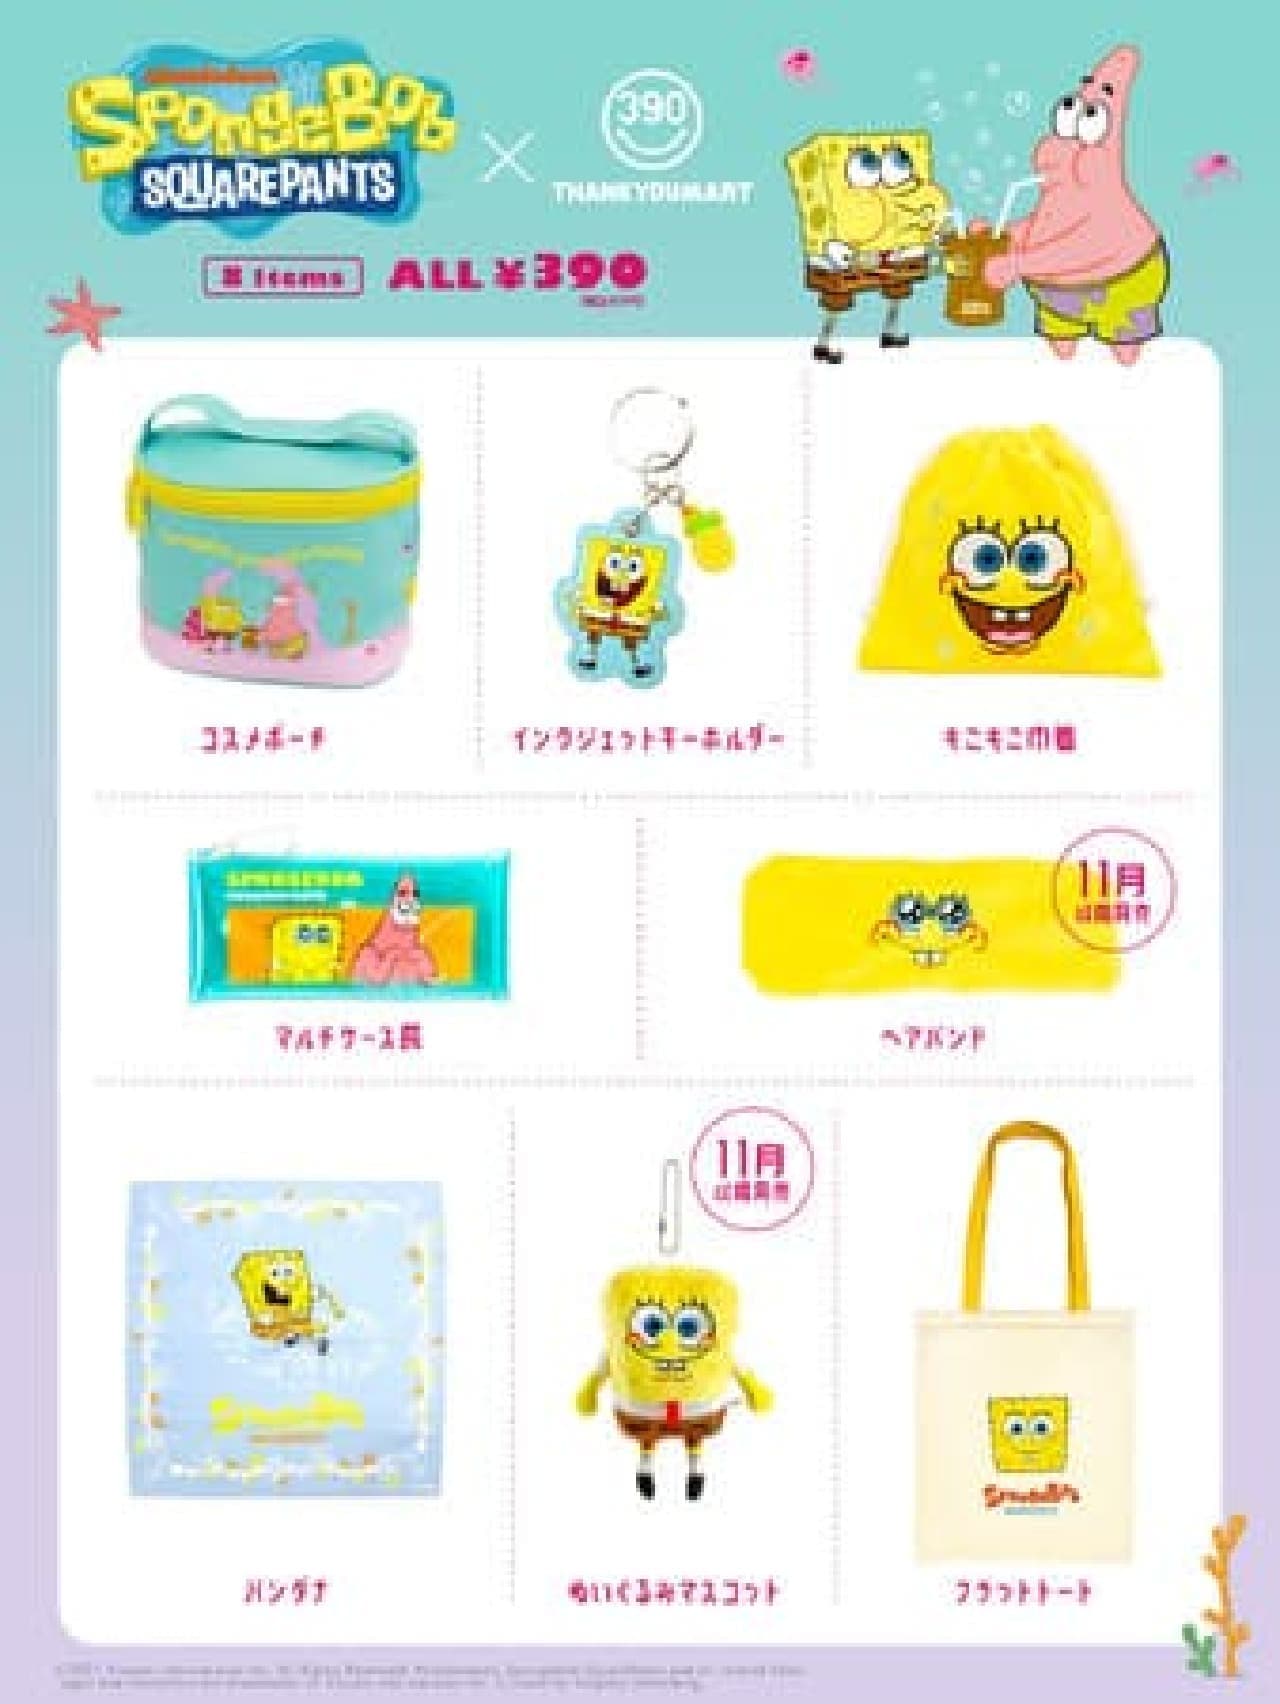 Collaboration product of Thank You Mart x SpongeBob --Tote bag, cosmetic pouch, mascot, etc.